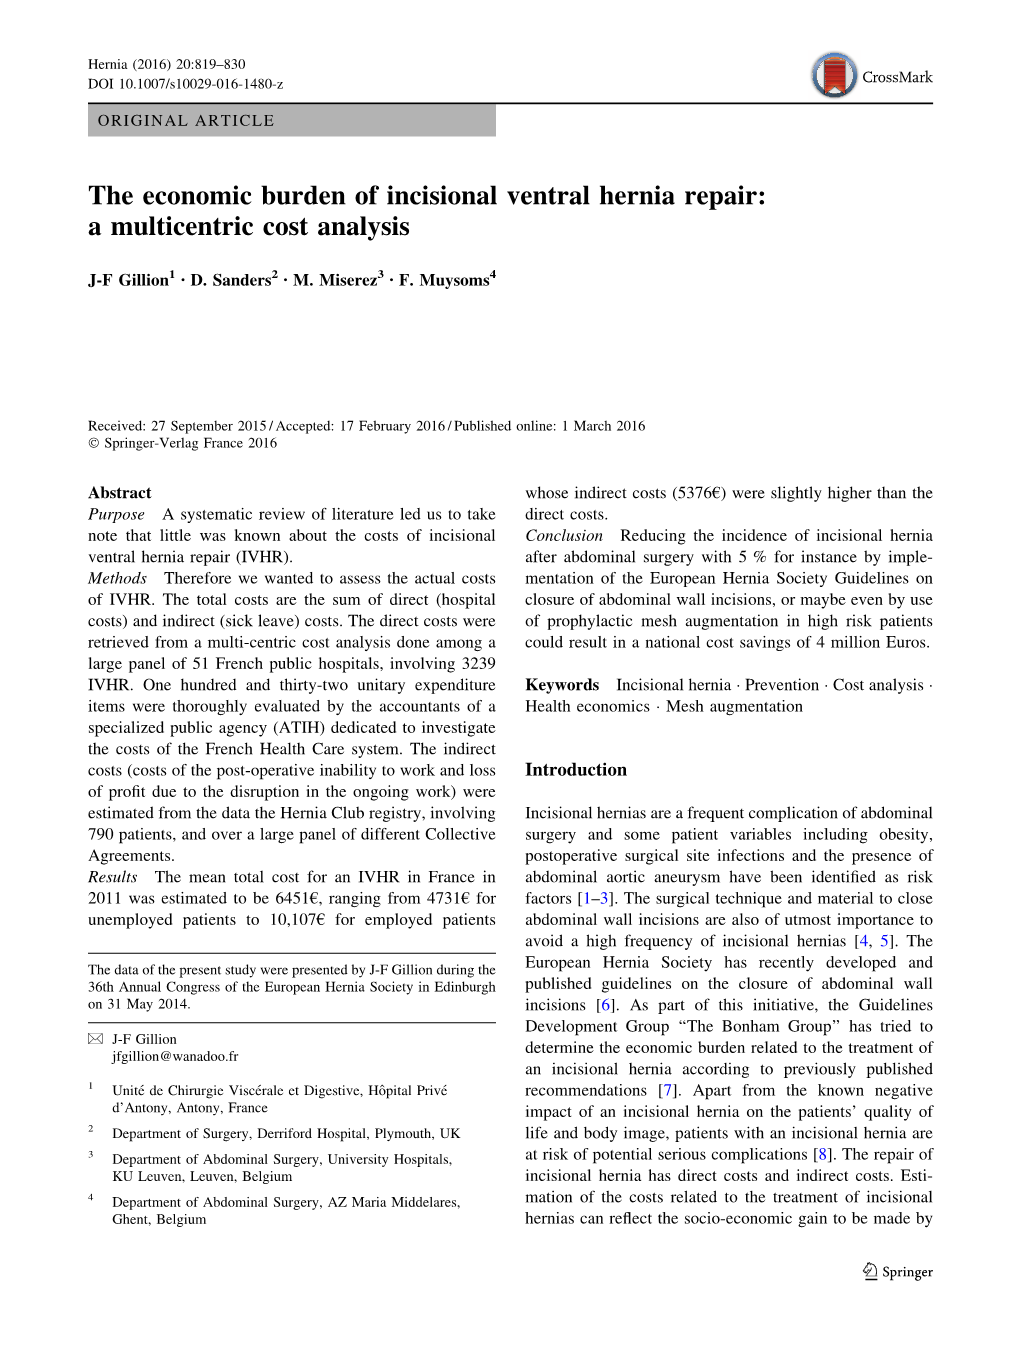 The Economic Burden of Incisional Ventral Hernia Repair: a Multicentric Cost Analysis